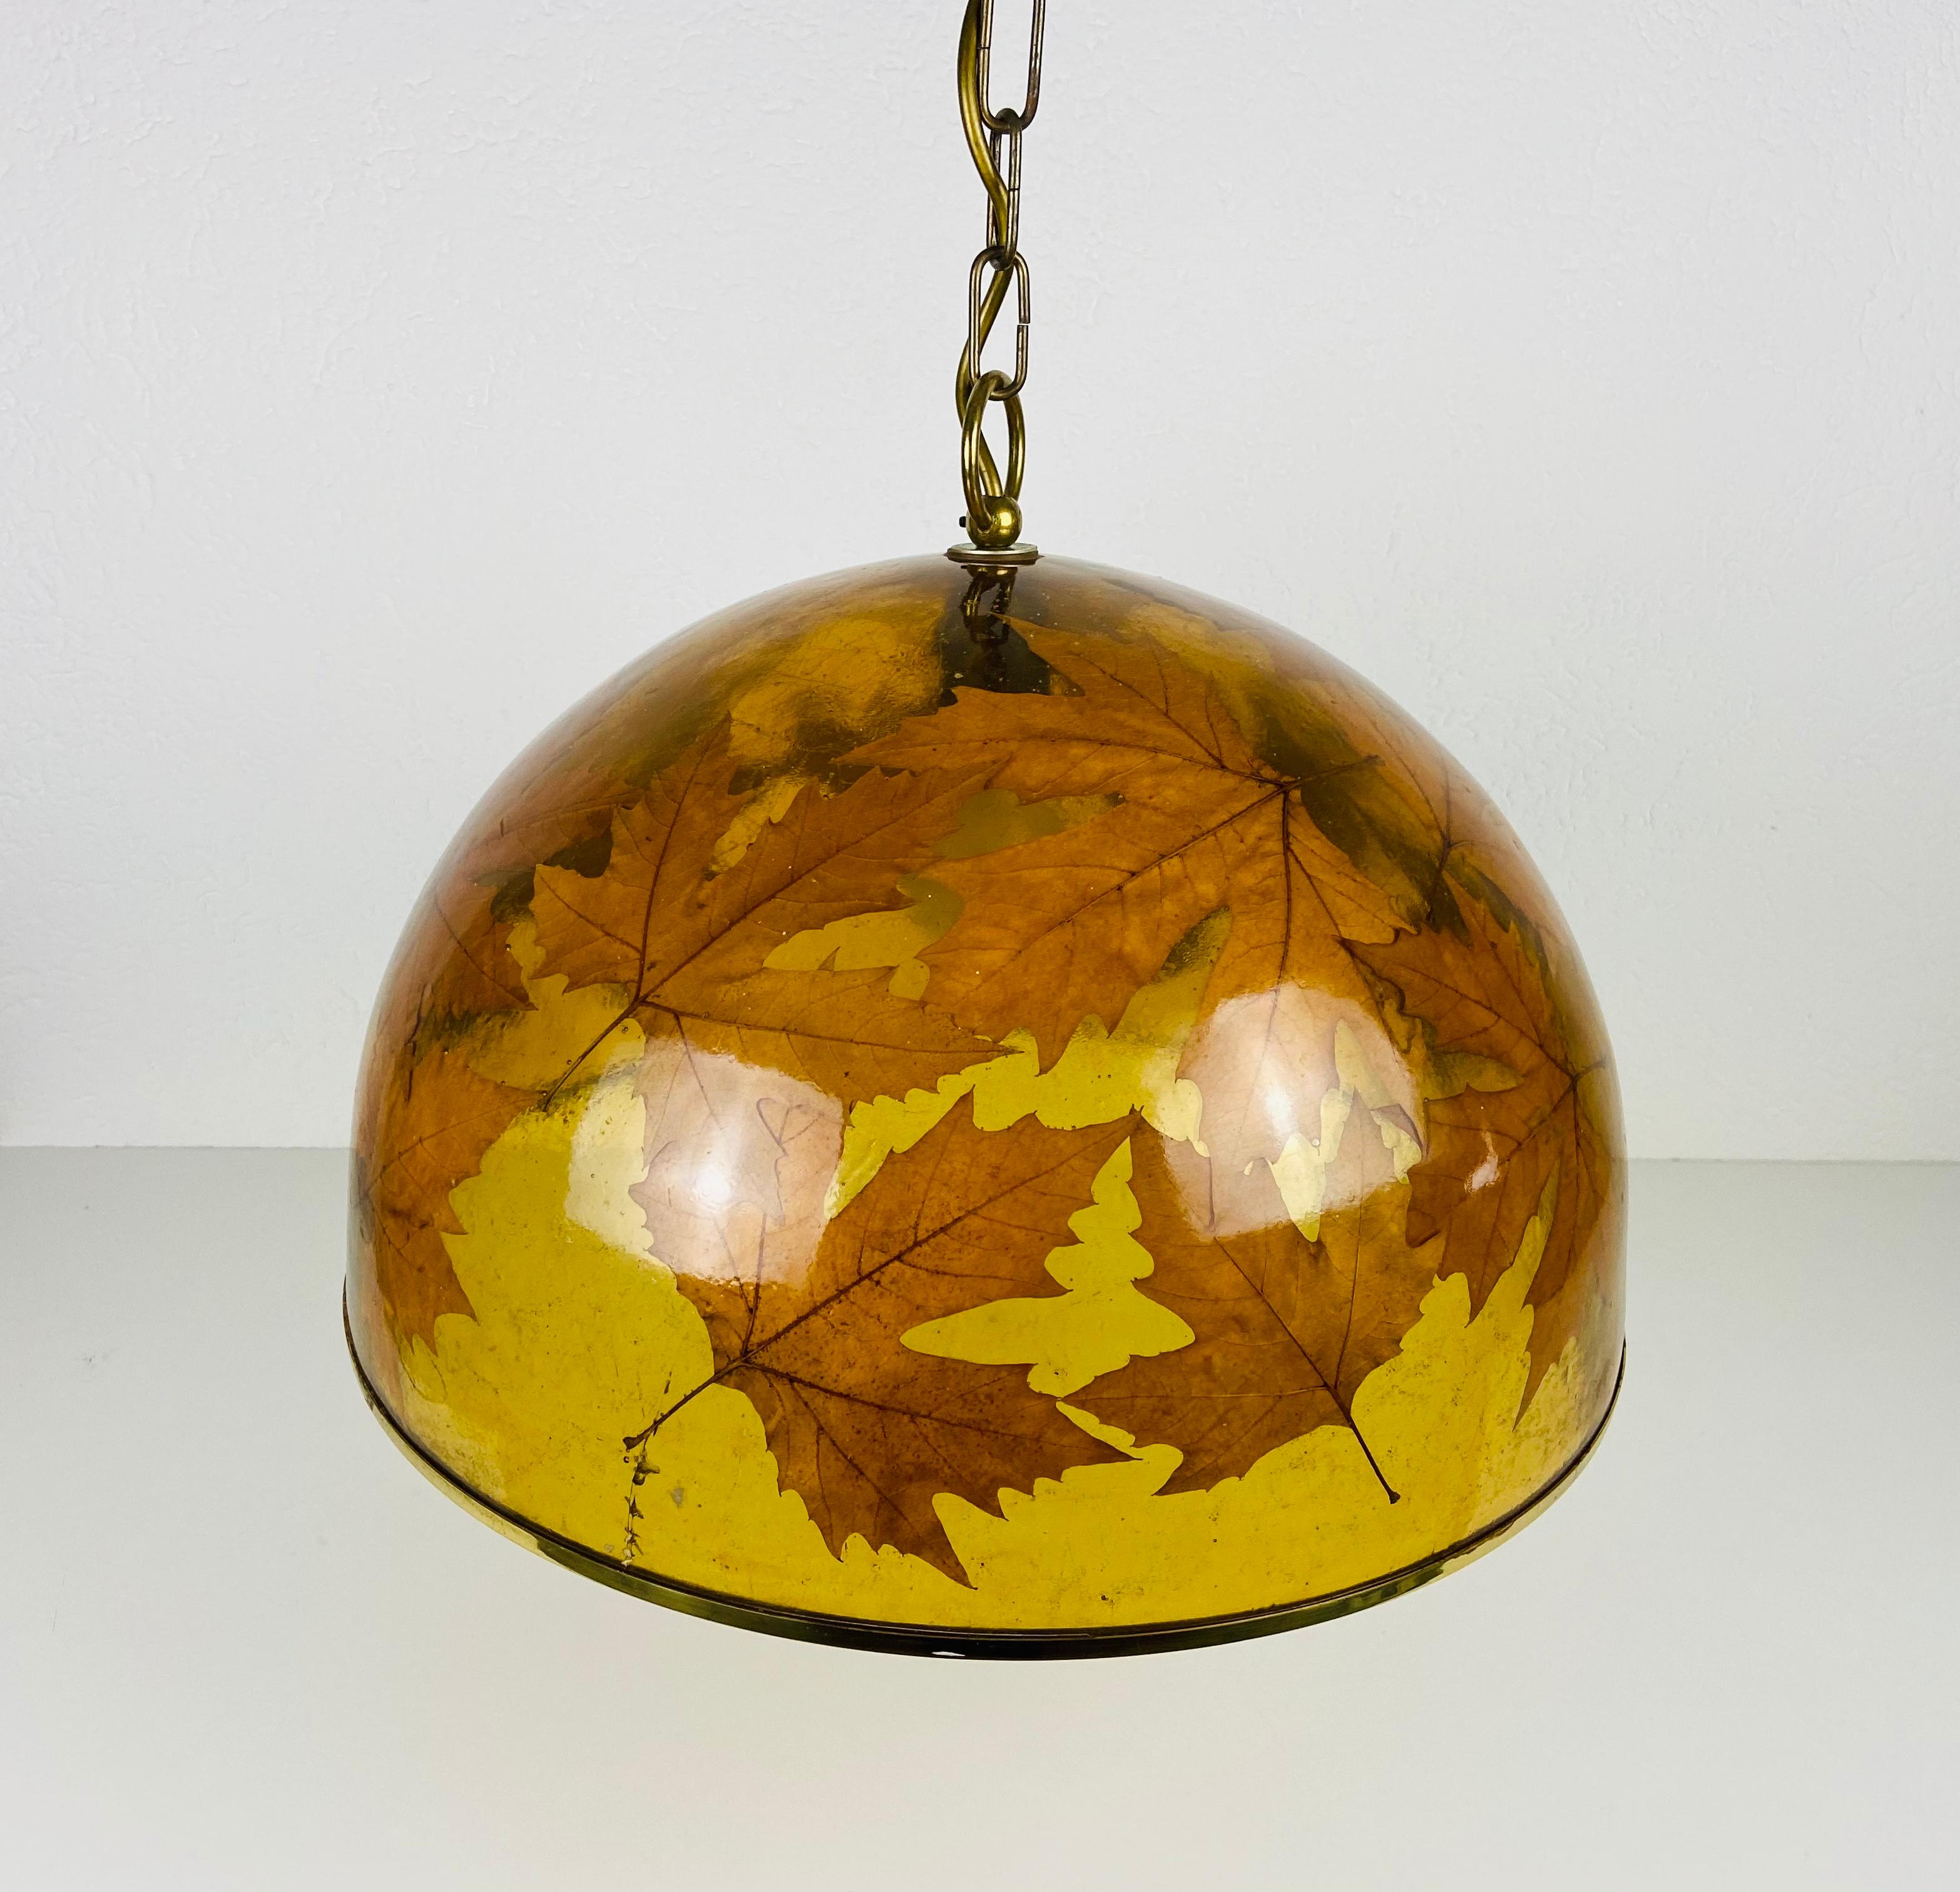 Mid-20th Century Midcentury Plexiglass Pendant Lamp with Real Leaves, Germany, 1960s For Sale